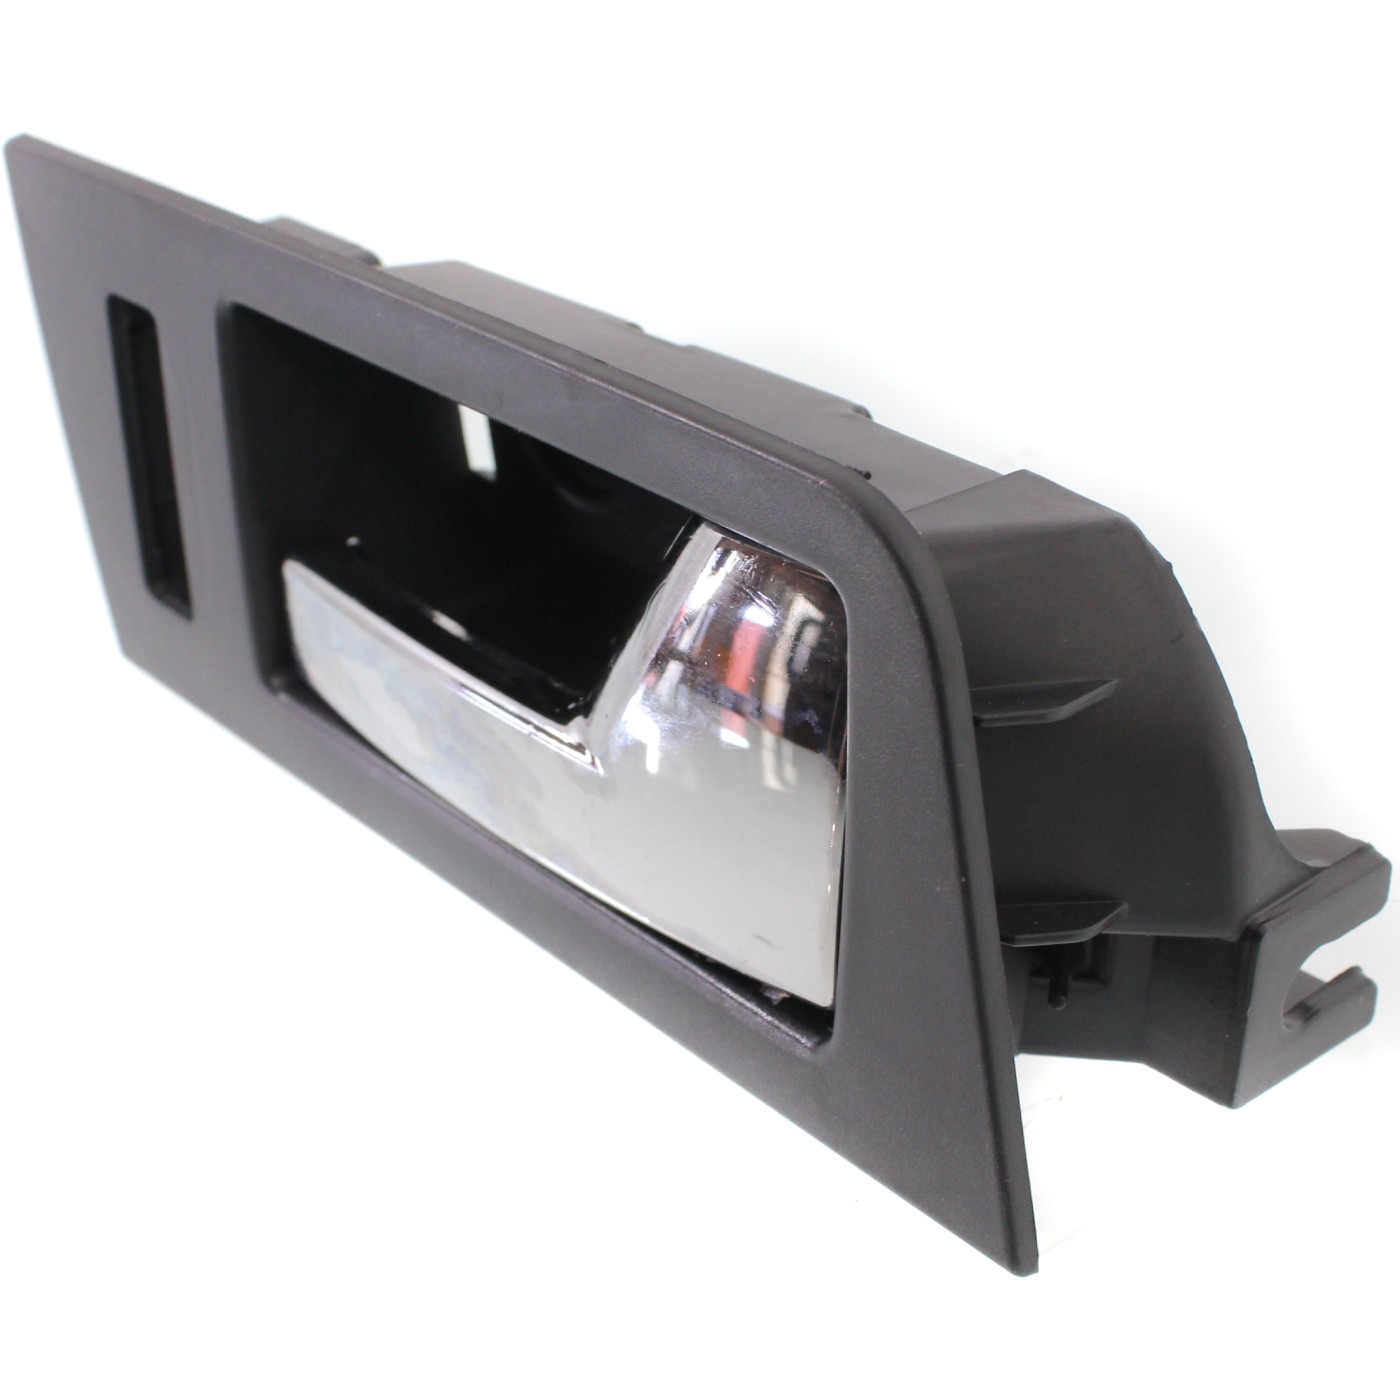 New 2012 Ford Focus Exterior Door Handle Removal for Living room